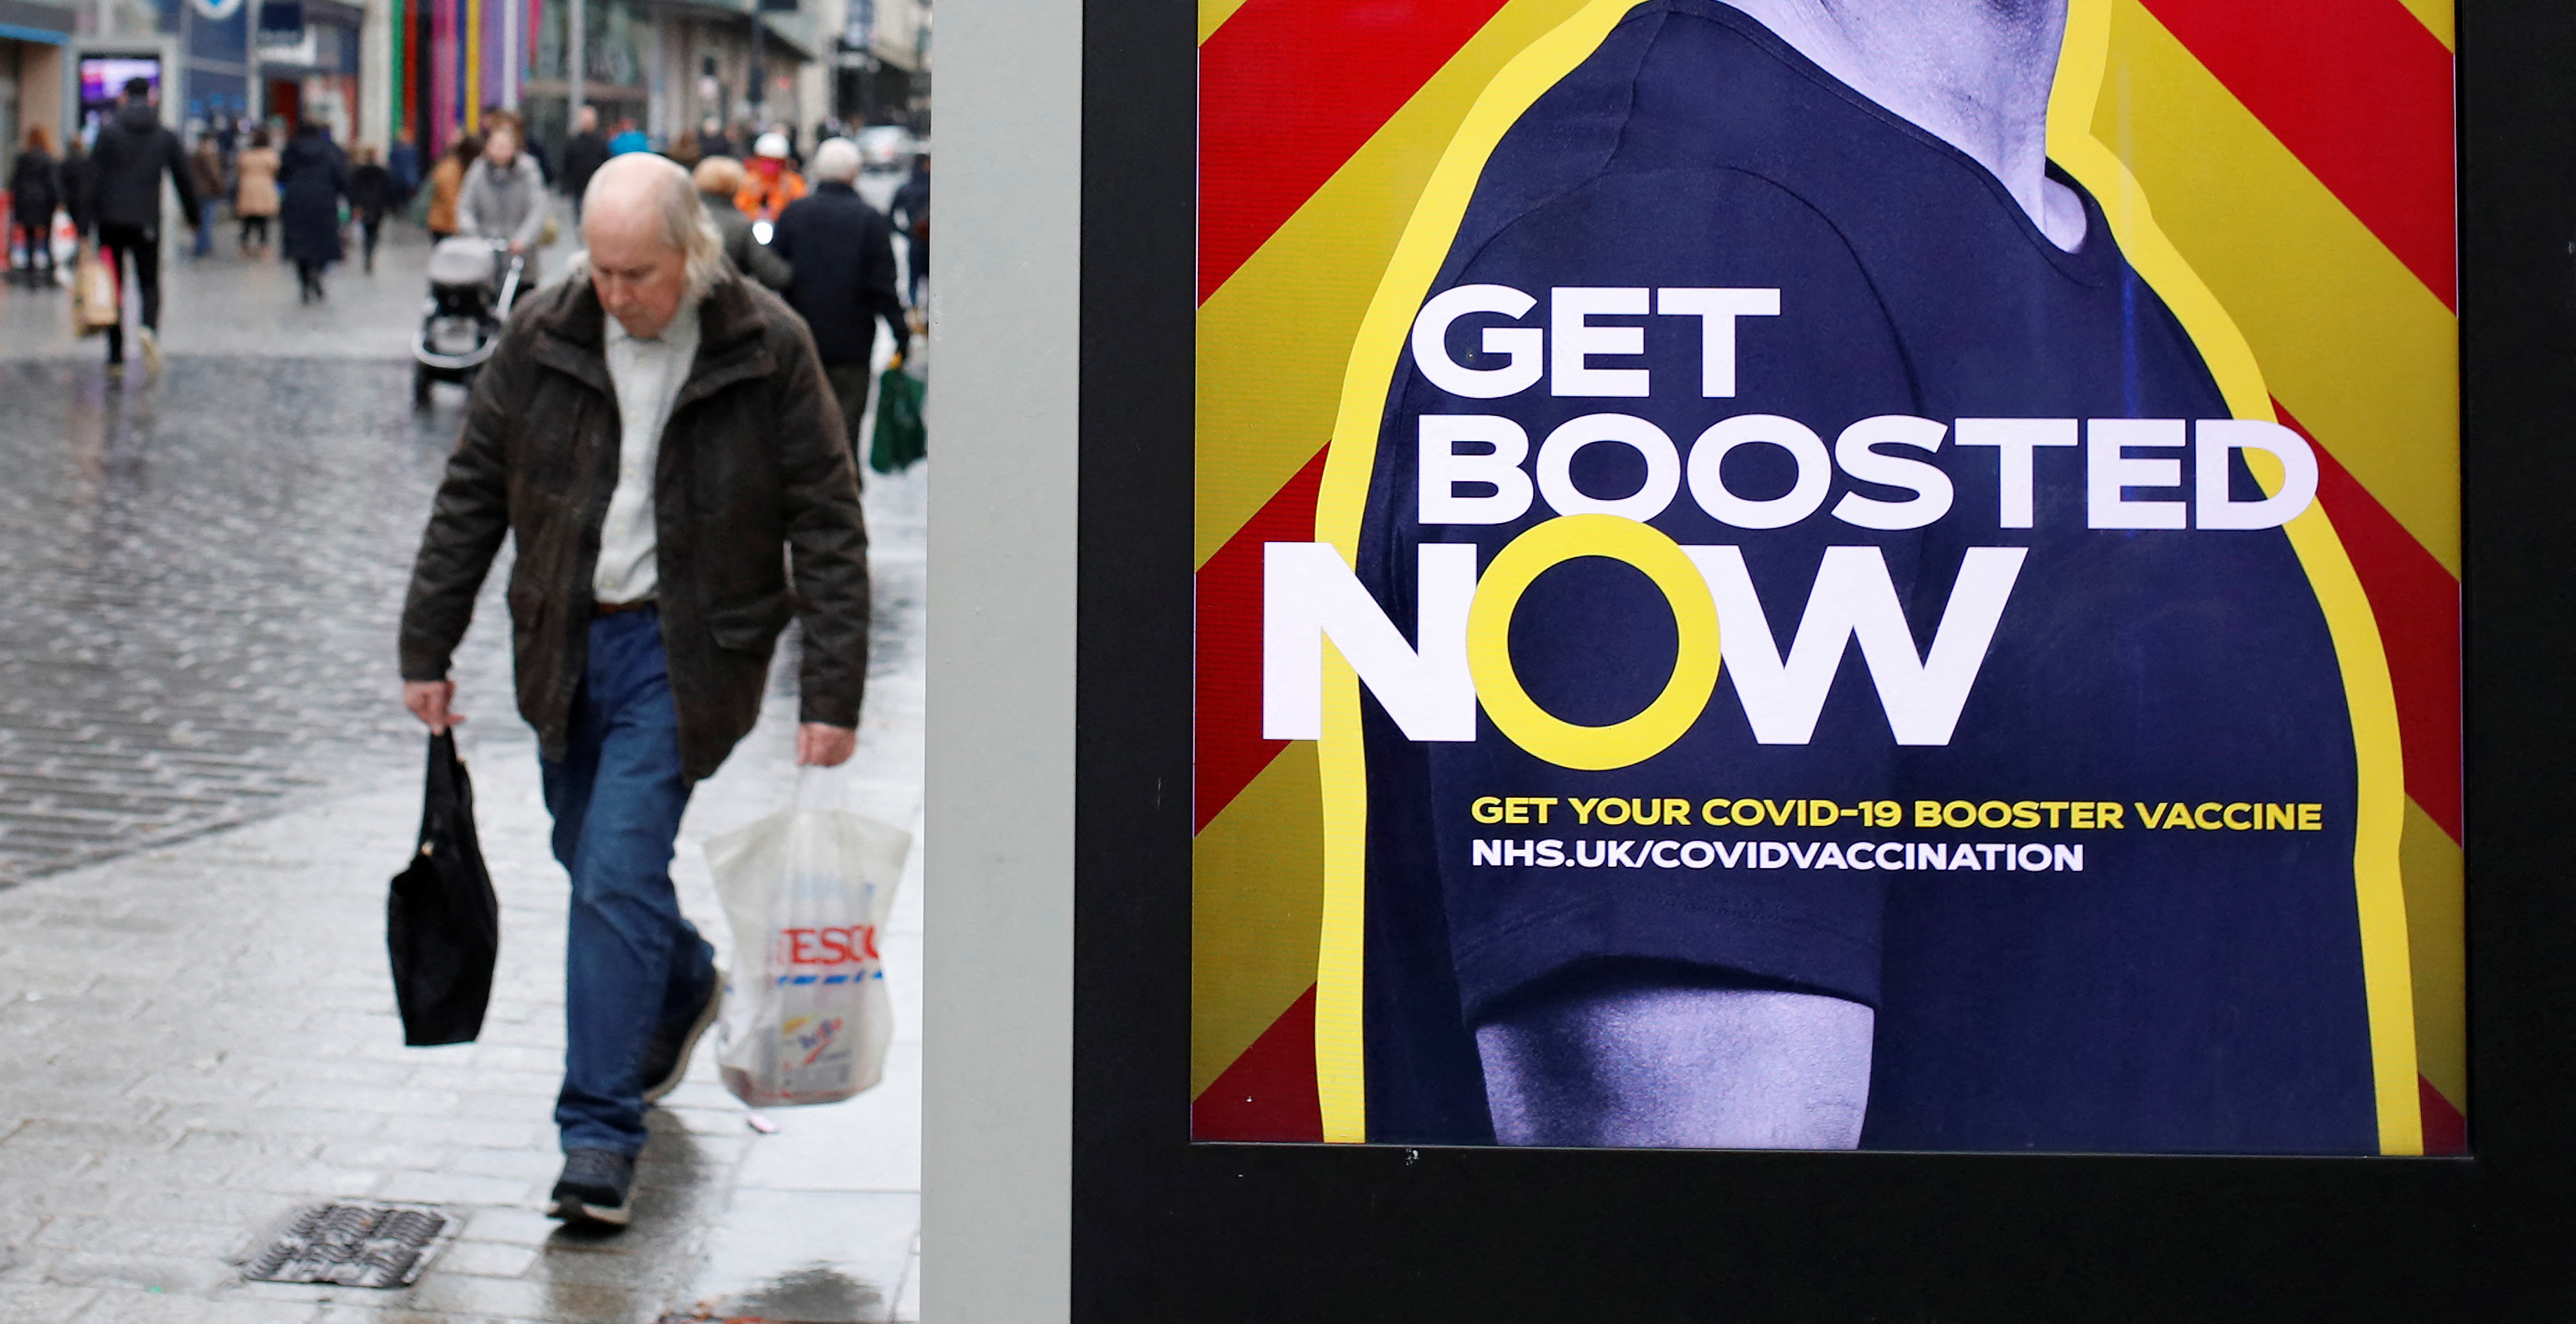 A man walks past an advertising board encouraging people to get their booster vaccination, amid the coronavirus disease (COVID-19) outbreak in Liverpool